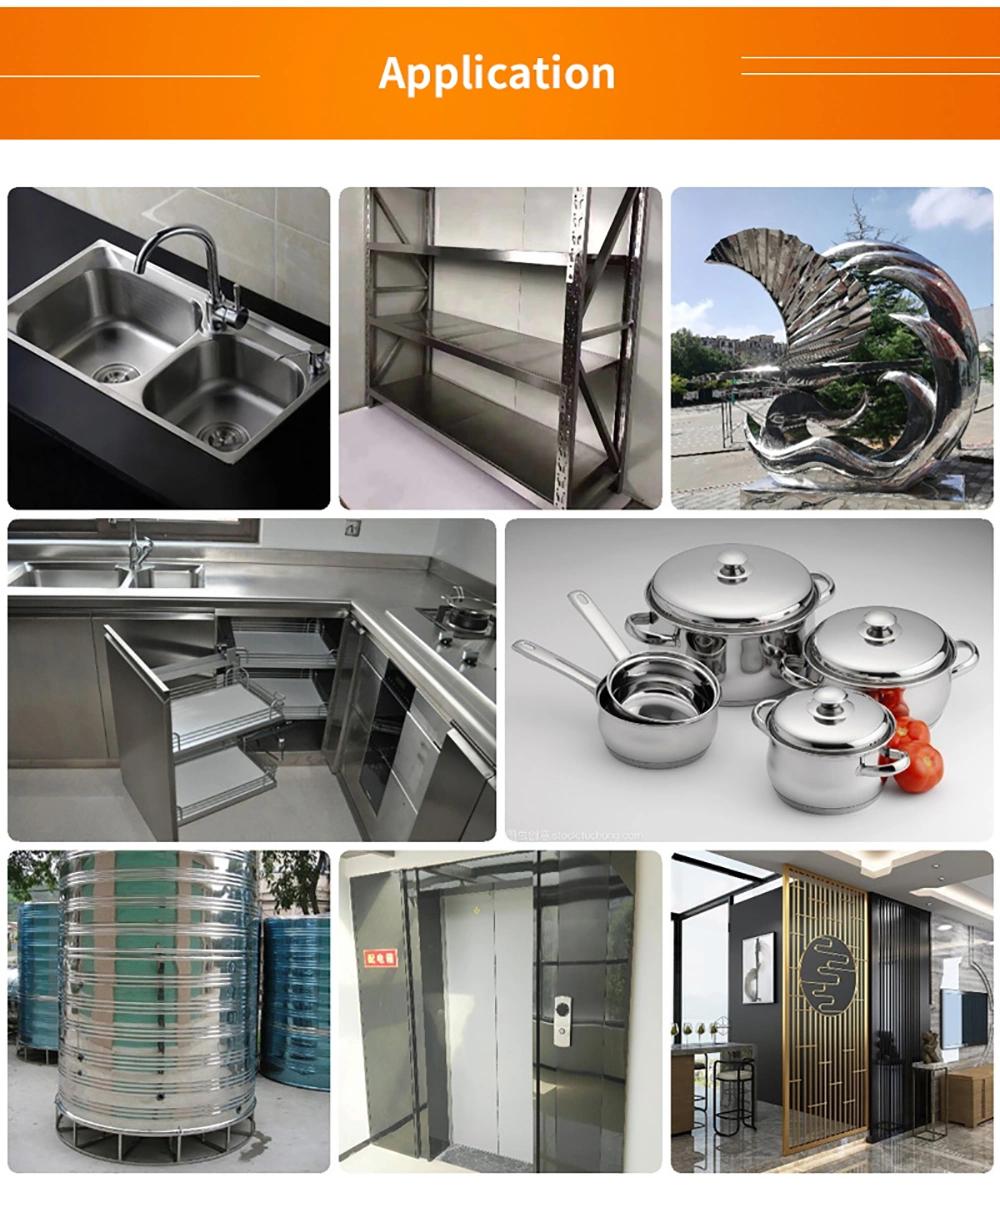 Creative Stainless Steel Plate Household Industrial Building Hot Tie Stainless Steel Plate